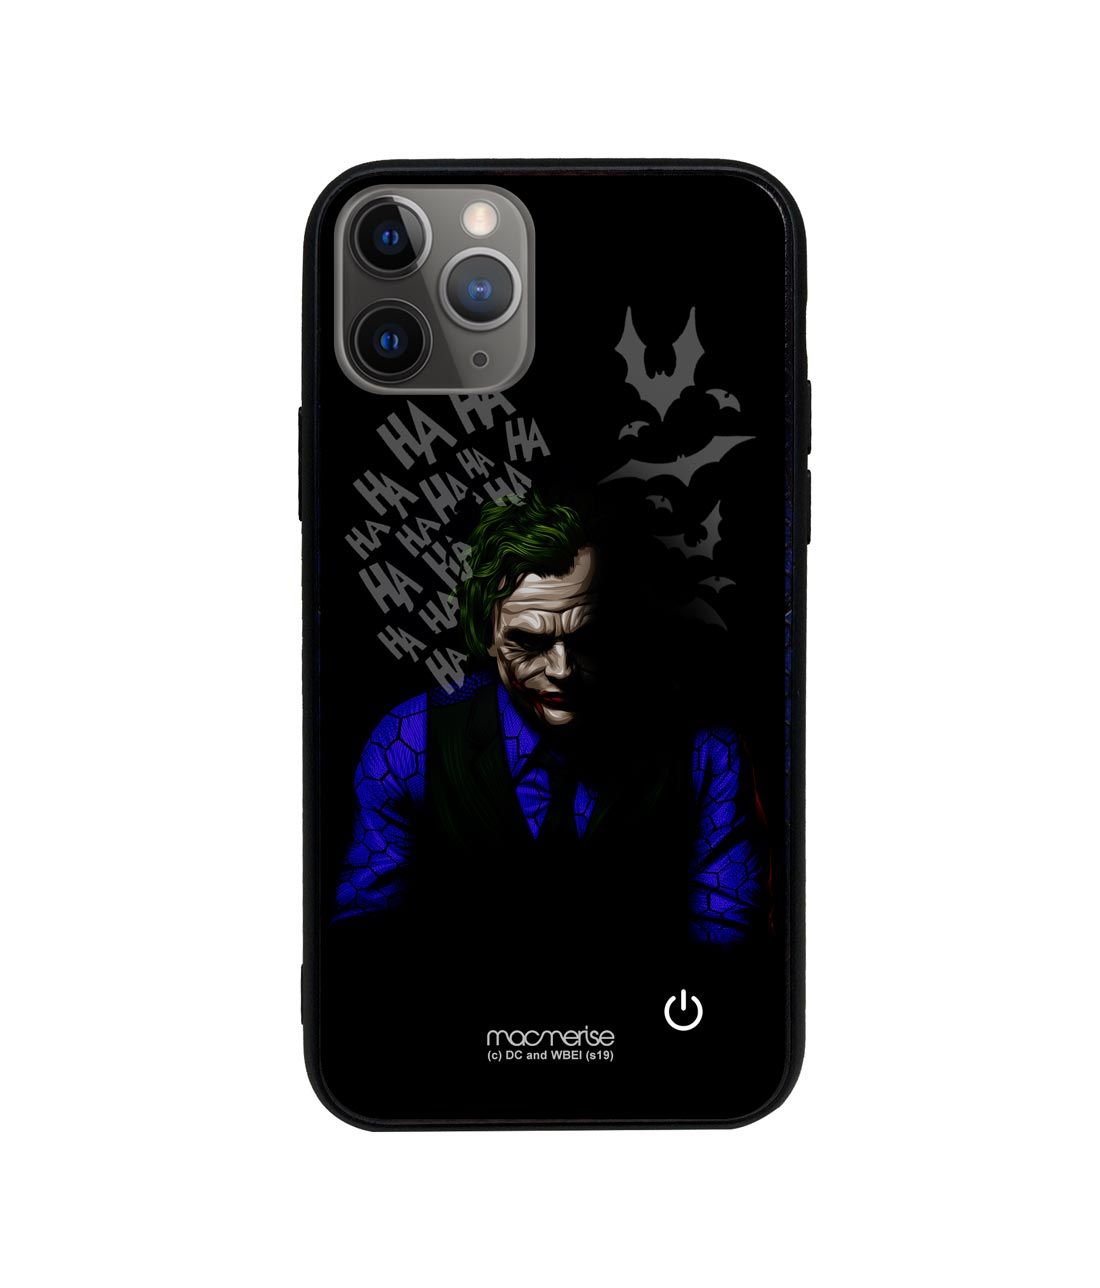 Guy with a Plan - Lumous LED Phone Case for iPhone 11 Pro